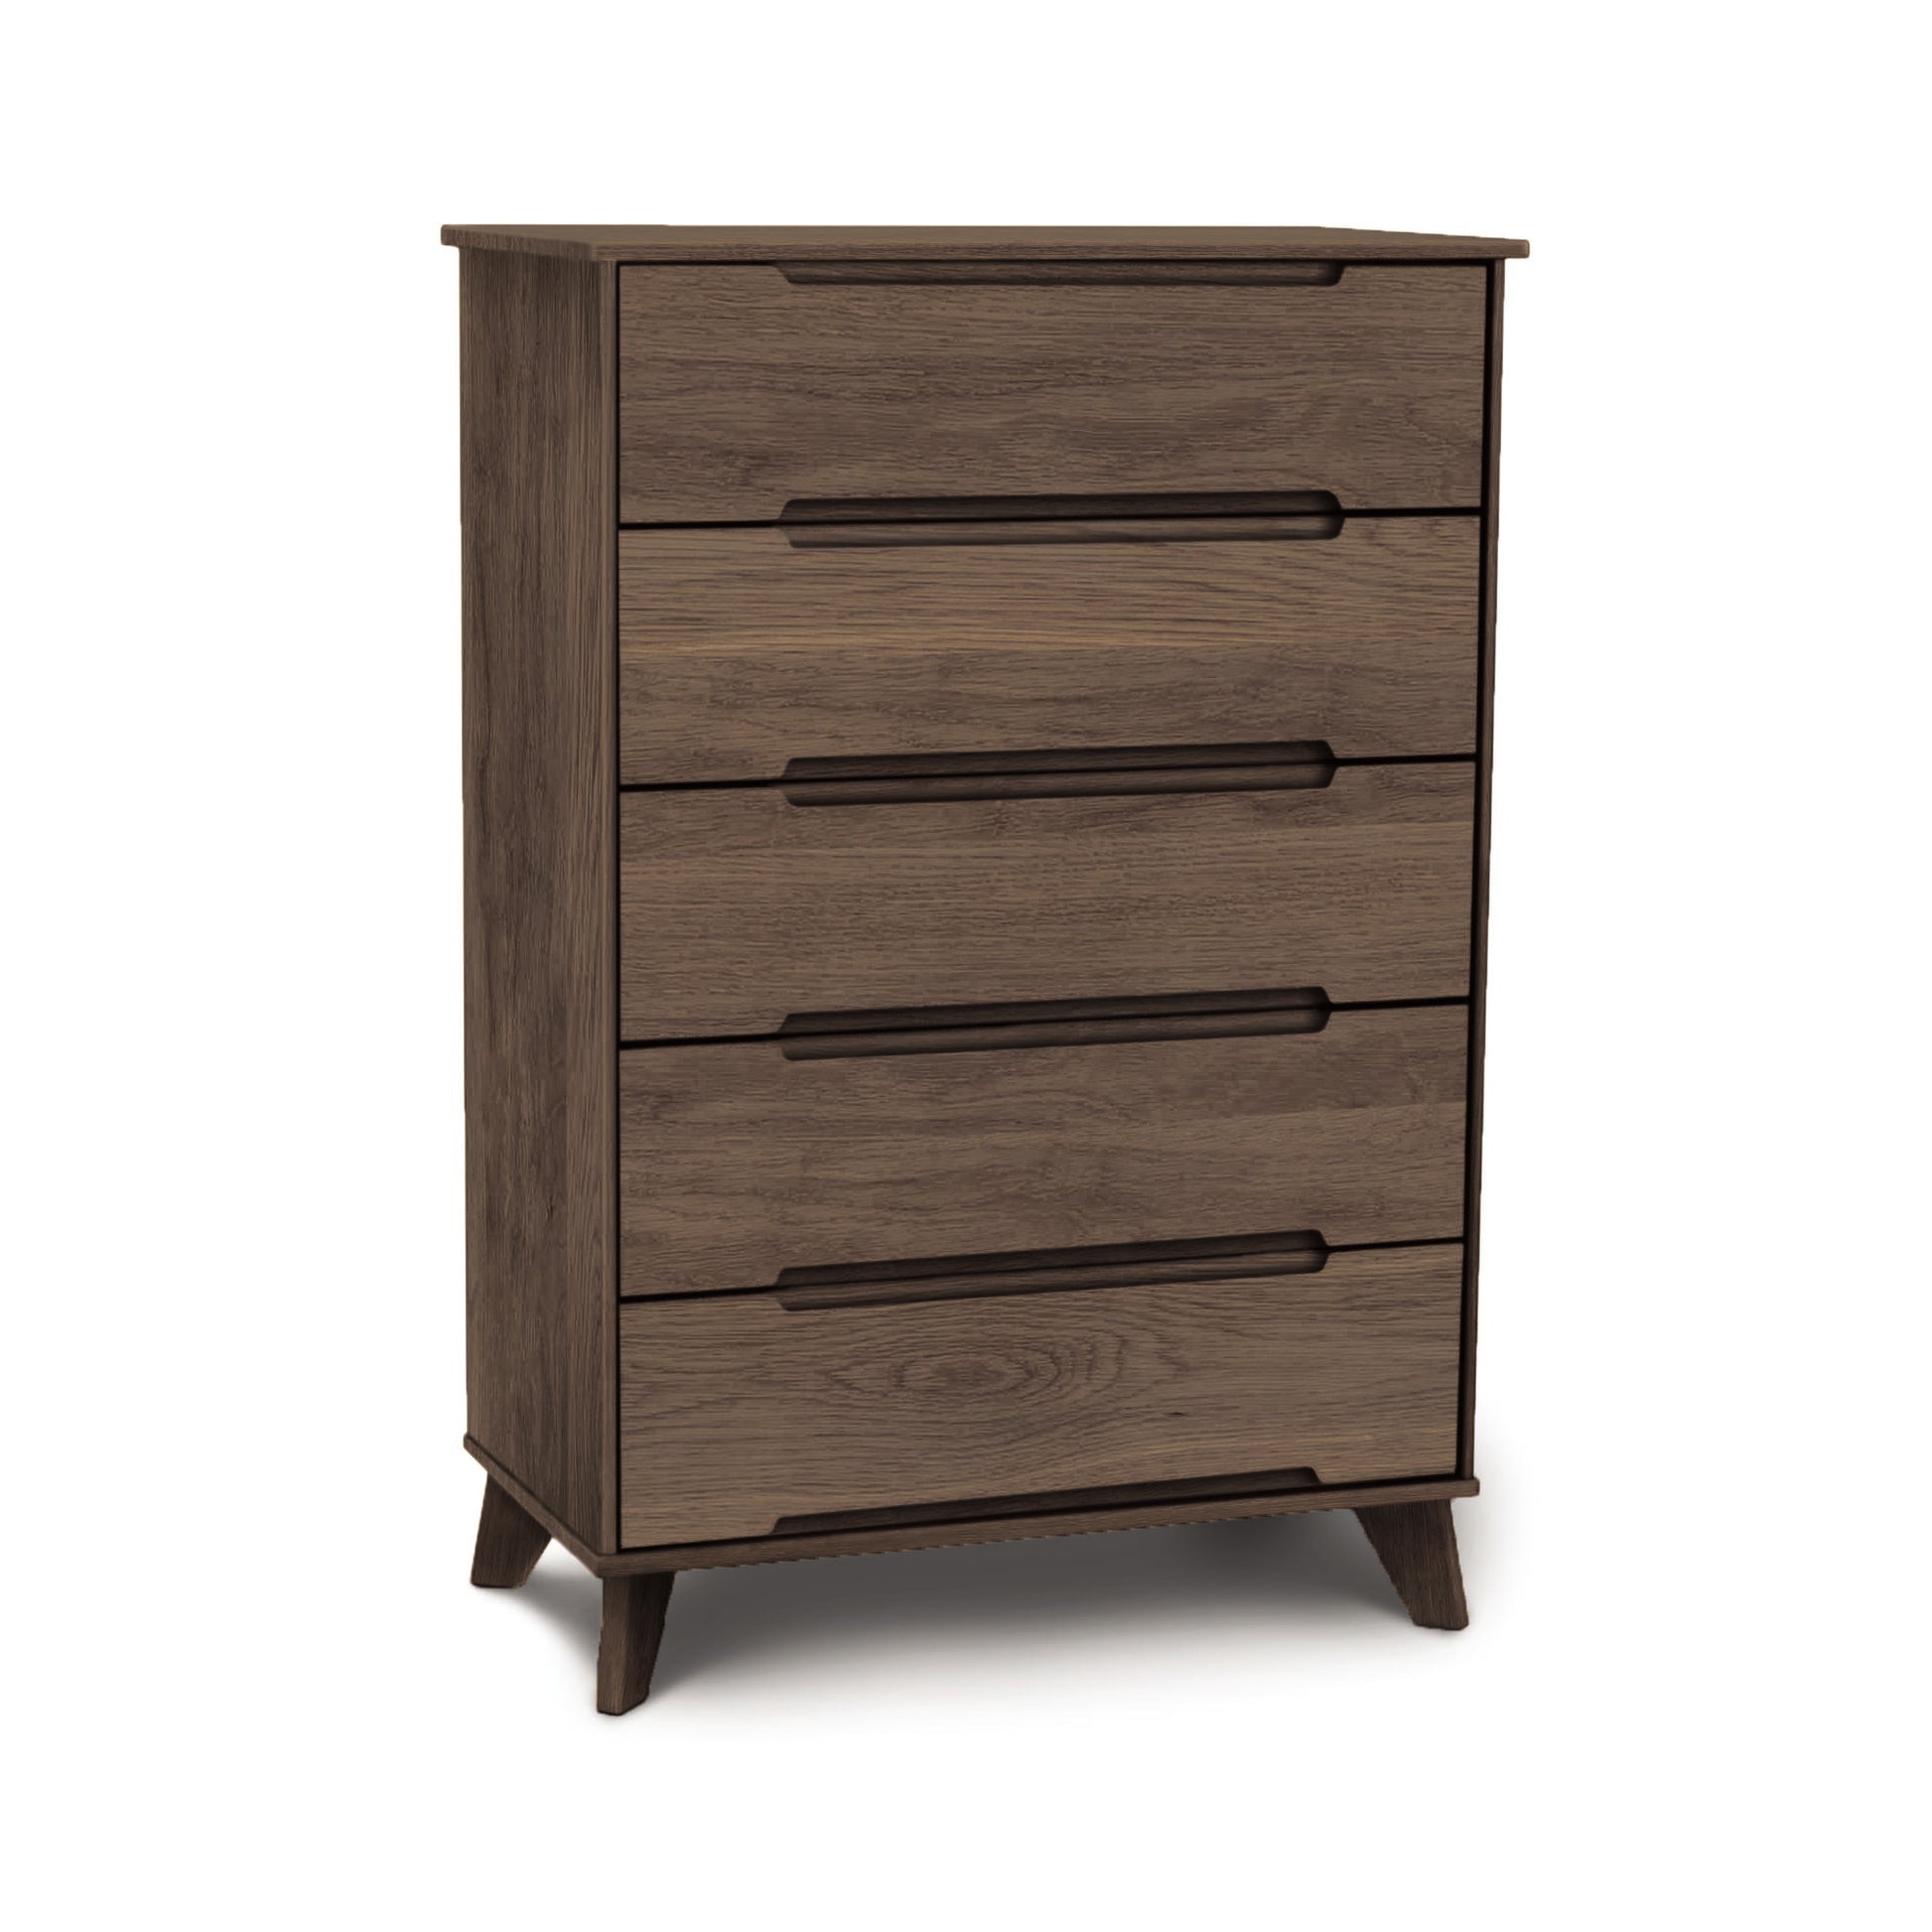 A brown wooden Linn 5-Drawer Wide Chest dresser from Copeland Furniture, featuring a mid-century modern design, against a white background.